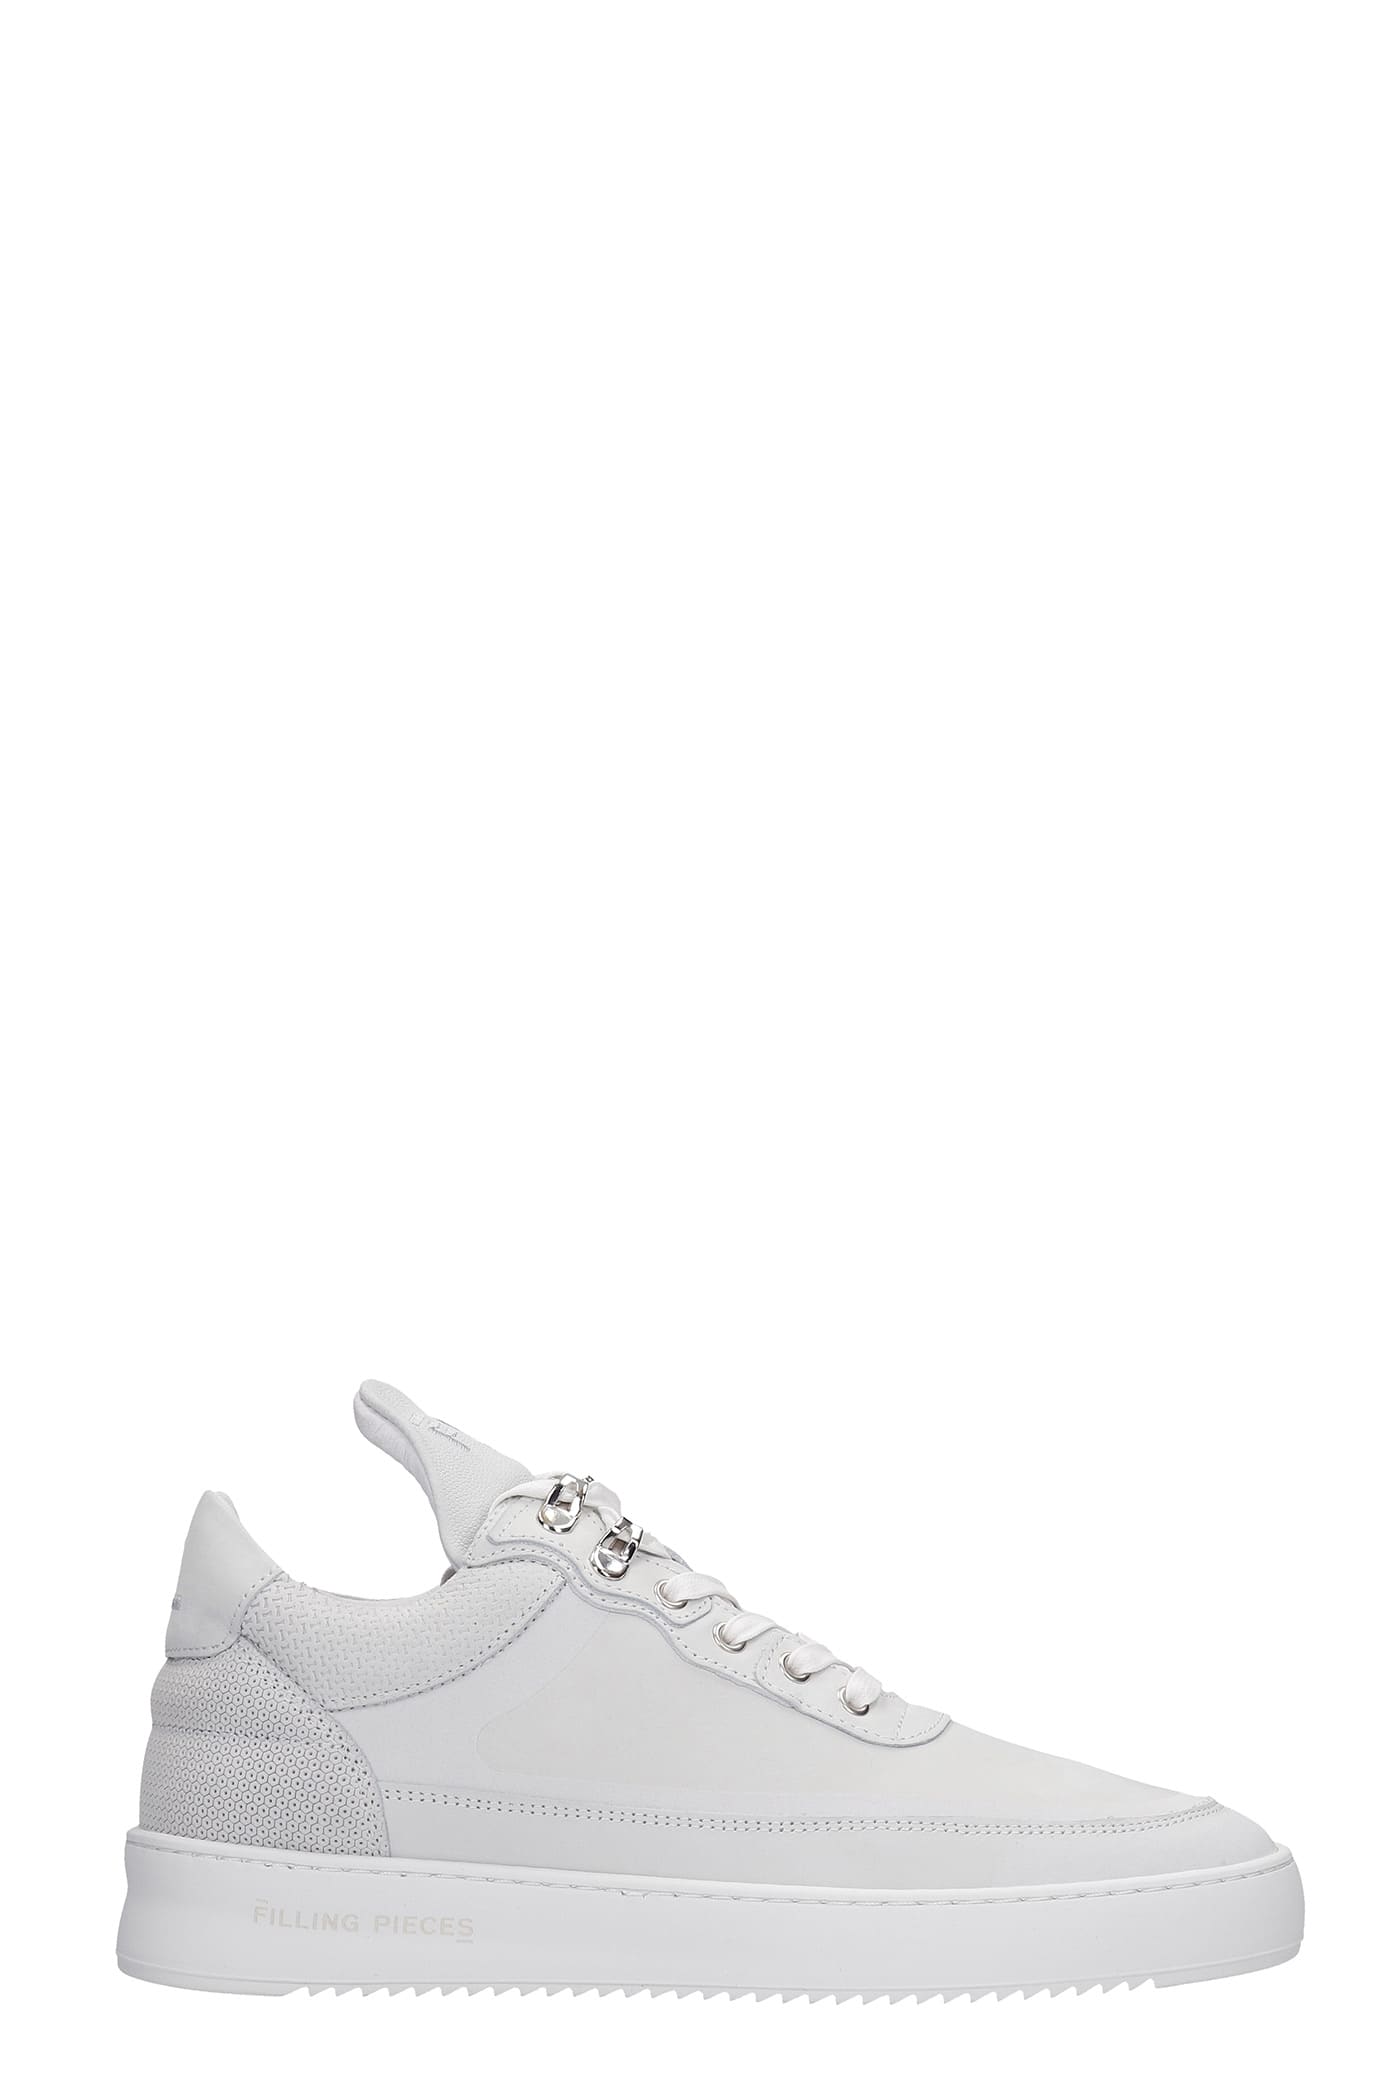 Filling Pieces Low Top Ripple Sneakers In White Leather And Fabric